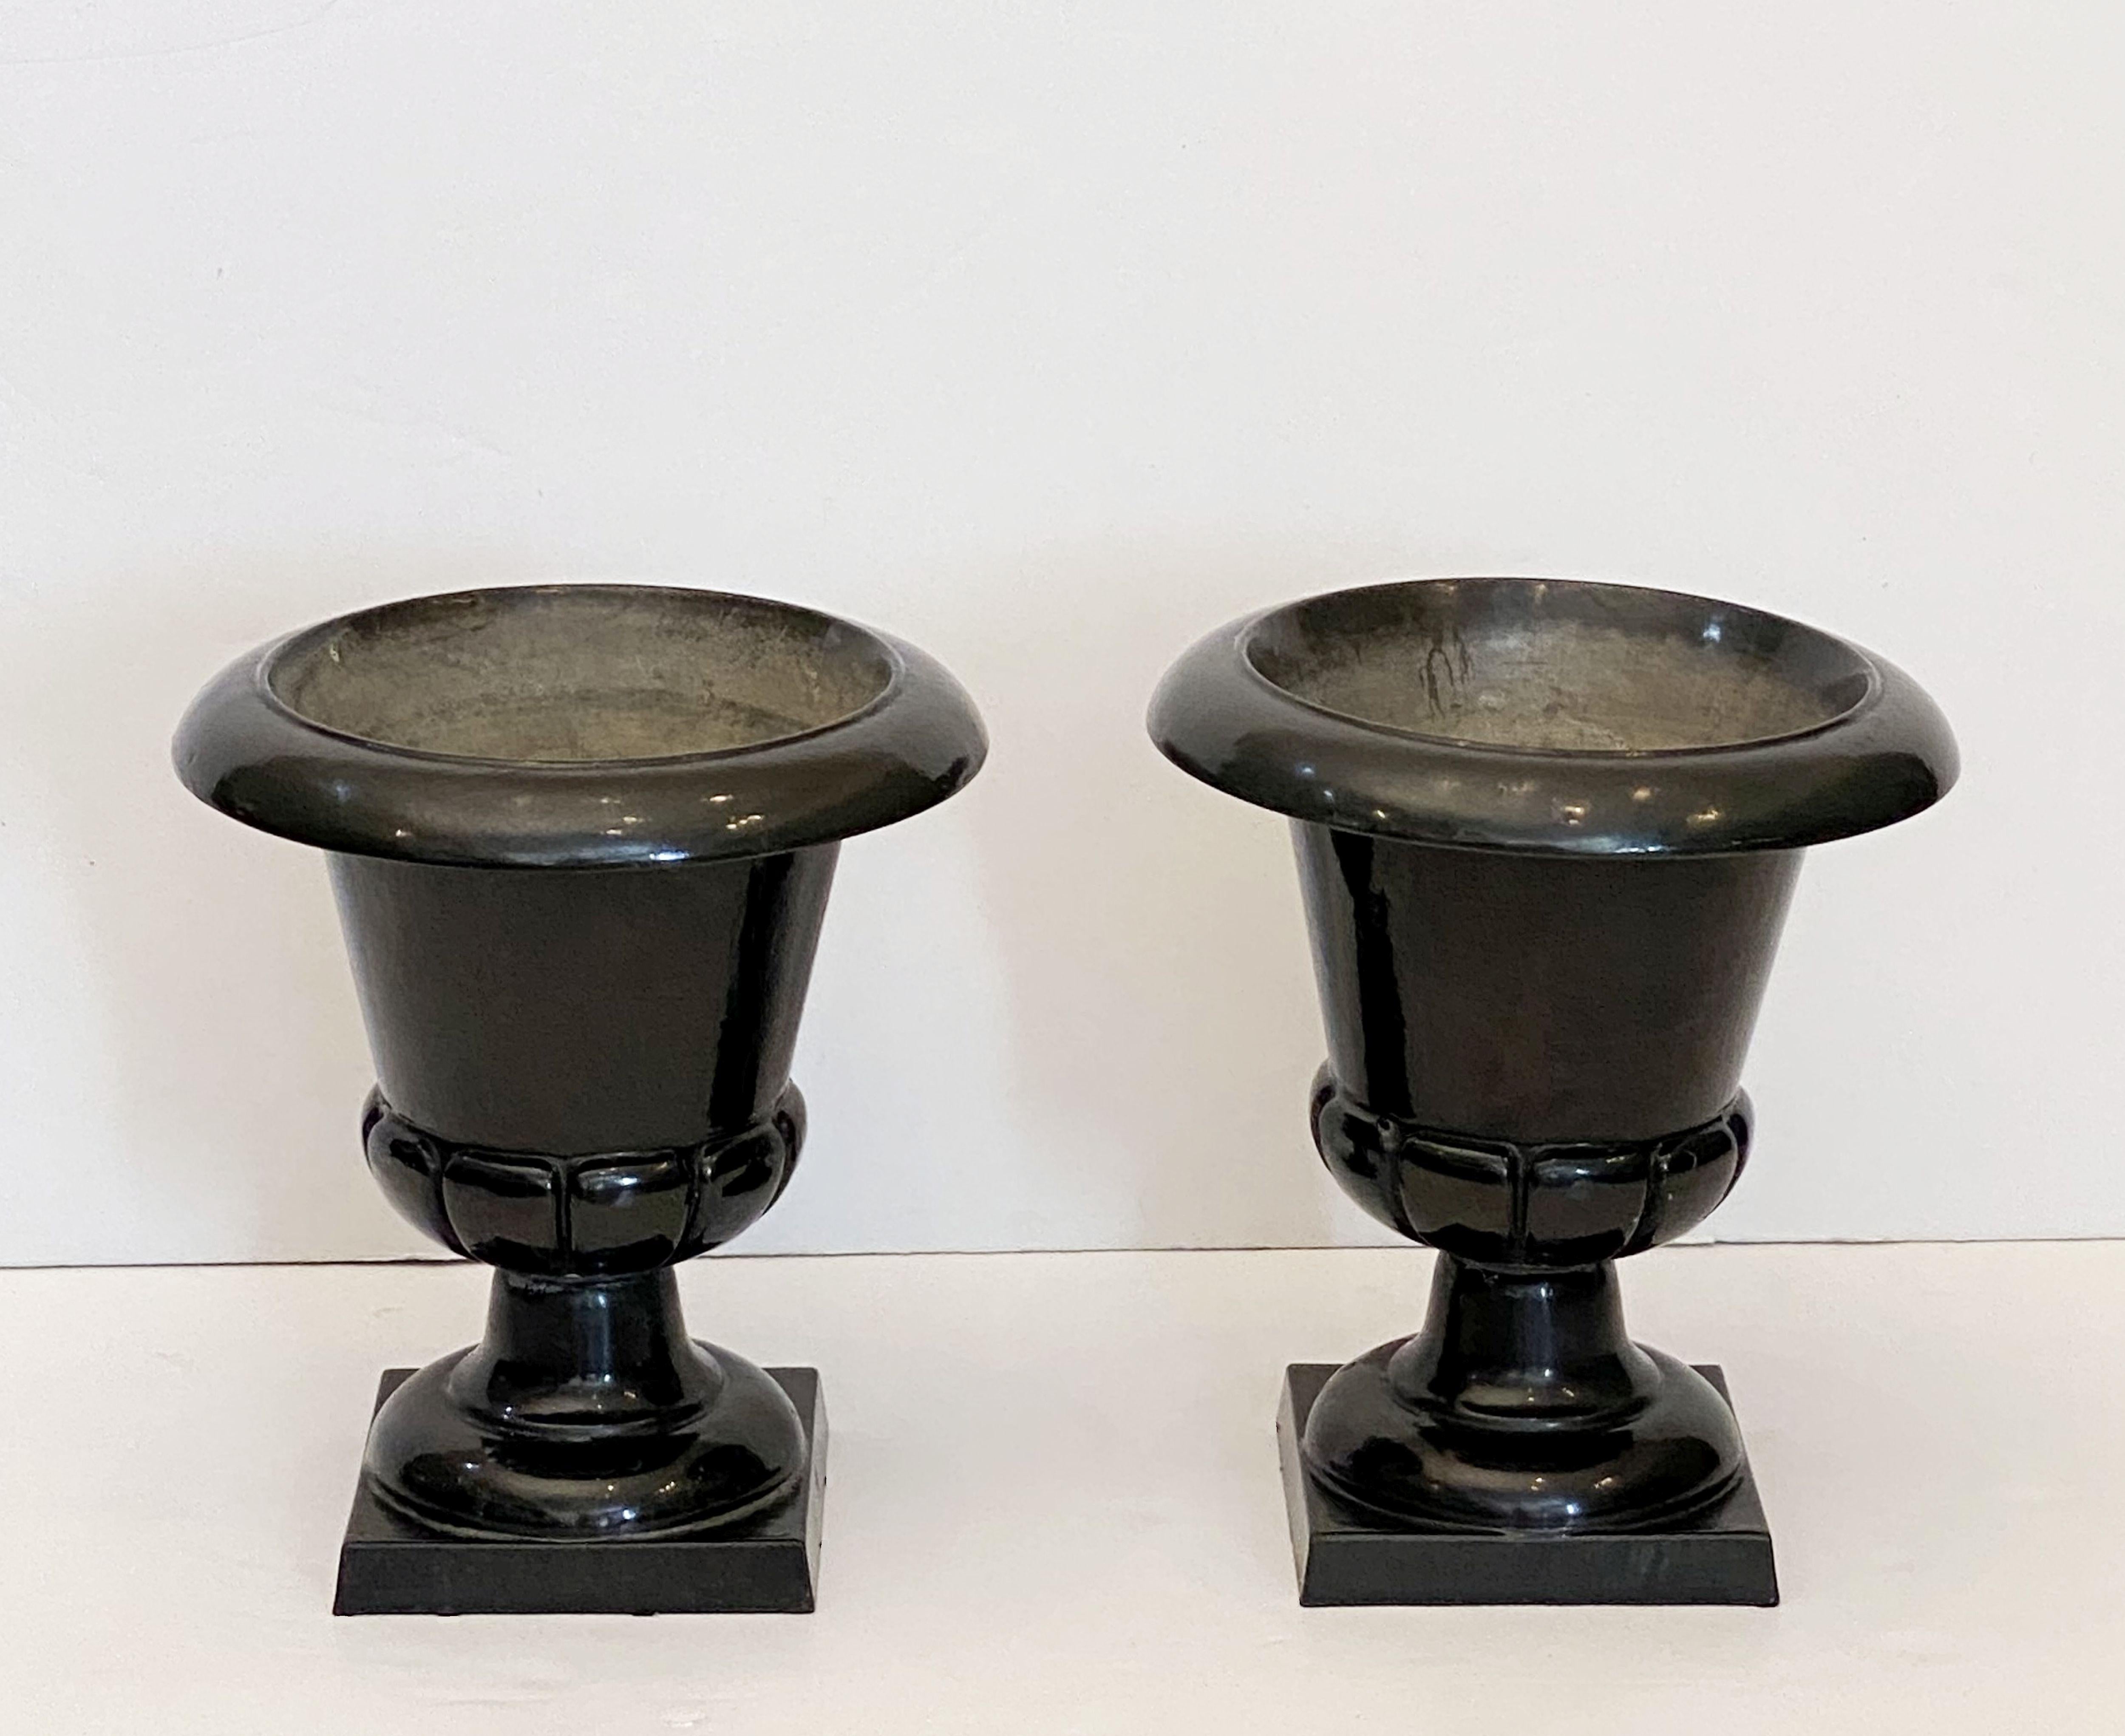 A fine pair of English garden urns or planter pots of cast iron with a black enamel glaze finish, each planter urn resting on a square plinth base.

Perfect for an indoor or outdoor garden room, garden, or conservatory!

Dimensions are height 17 1/2